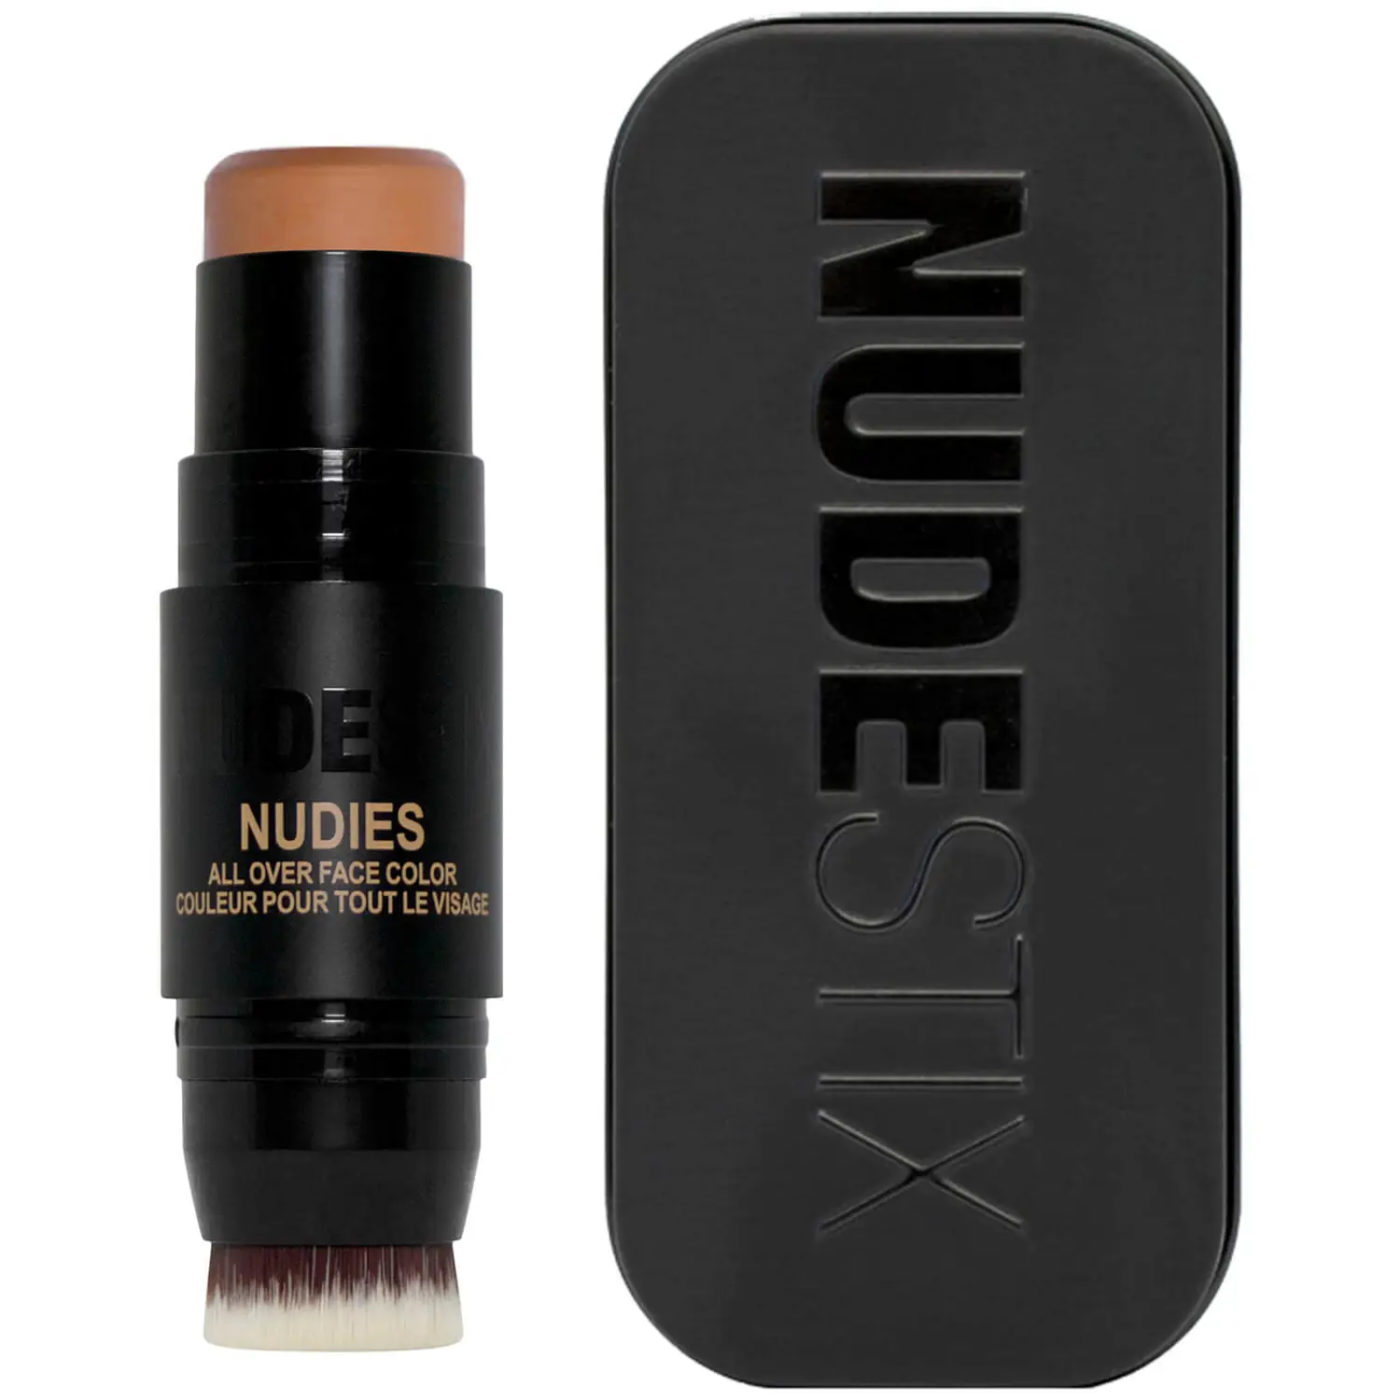 Nudies All Over Face Color